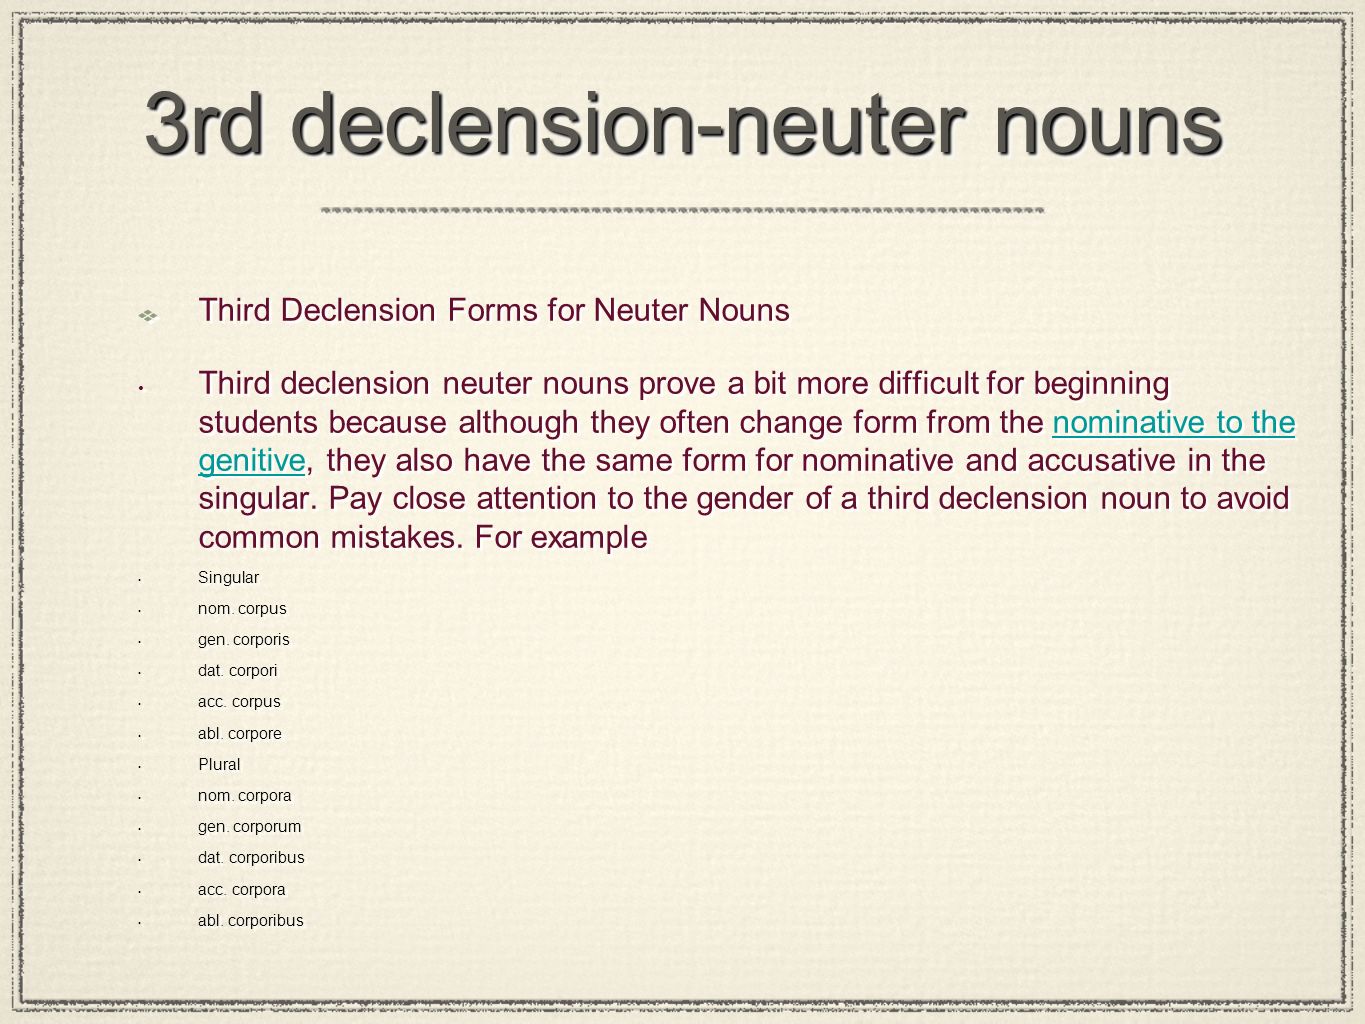 3rd declension-neuter nouns Third Declension Forms for Neuter Nouns Third declension neuter nouns prove a bit more difficult for beginning students because although they often change form from the nominative to the genitive, they also have the same form for nominative and accusative in the singular.